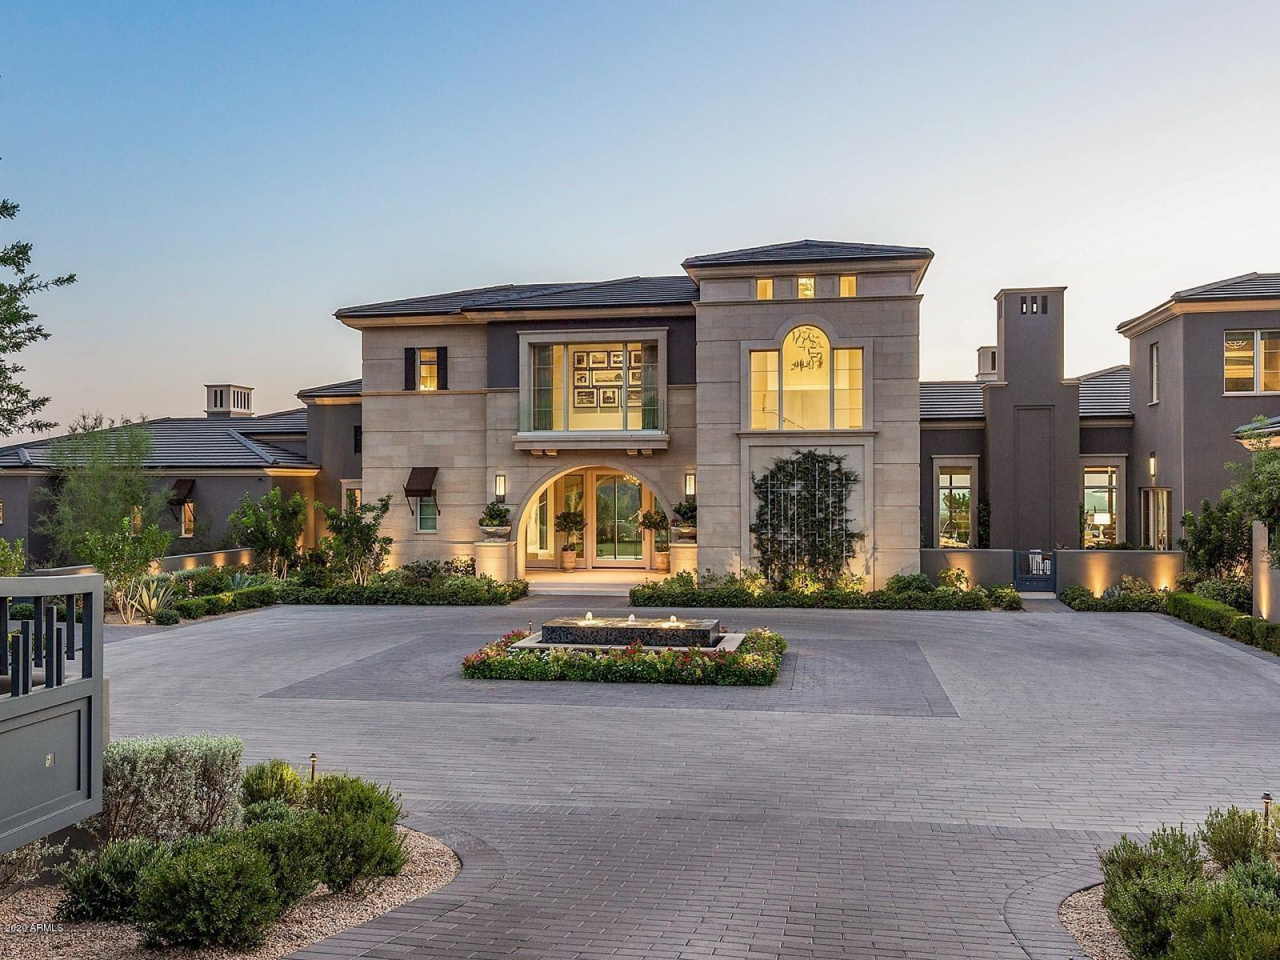 Second Highest Residential Sale in Arizona 